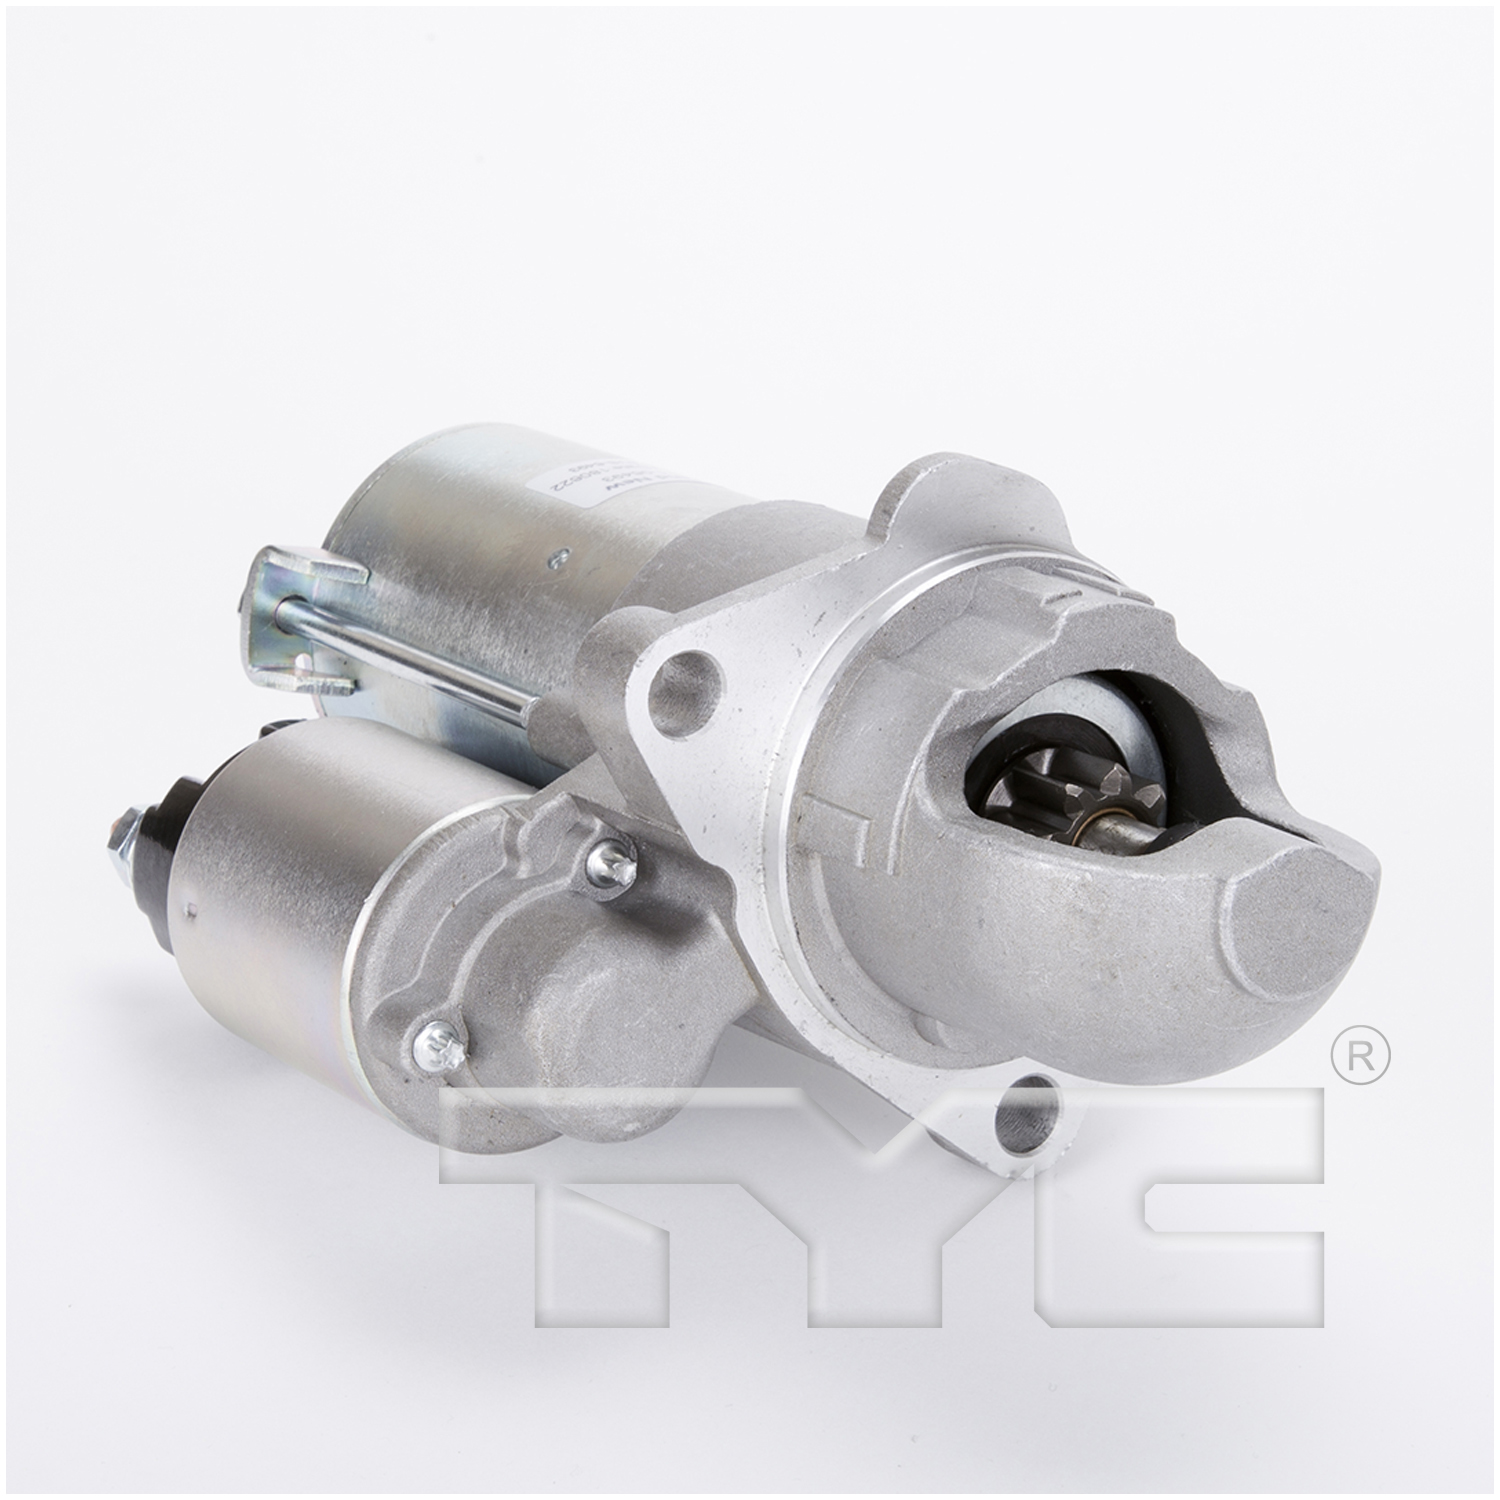 TYC-1-06493_NEW TYC STARTER 12V 9T CW PMGR DELCO PG260D 1.2KW